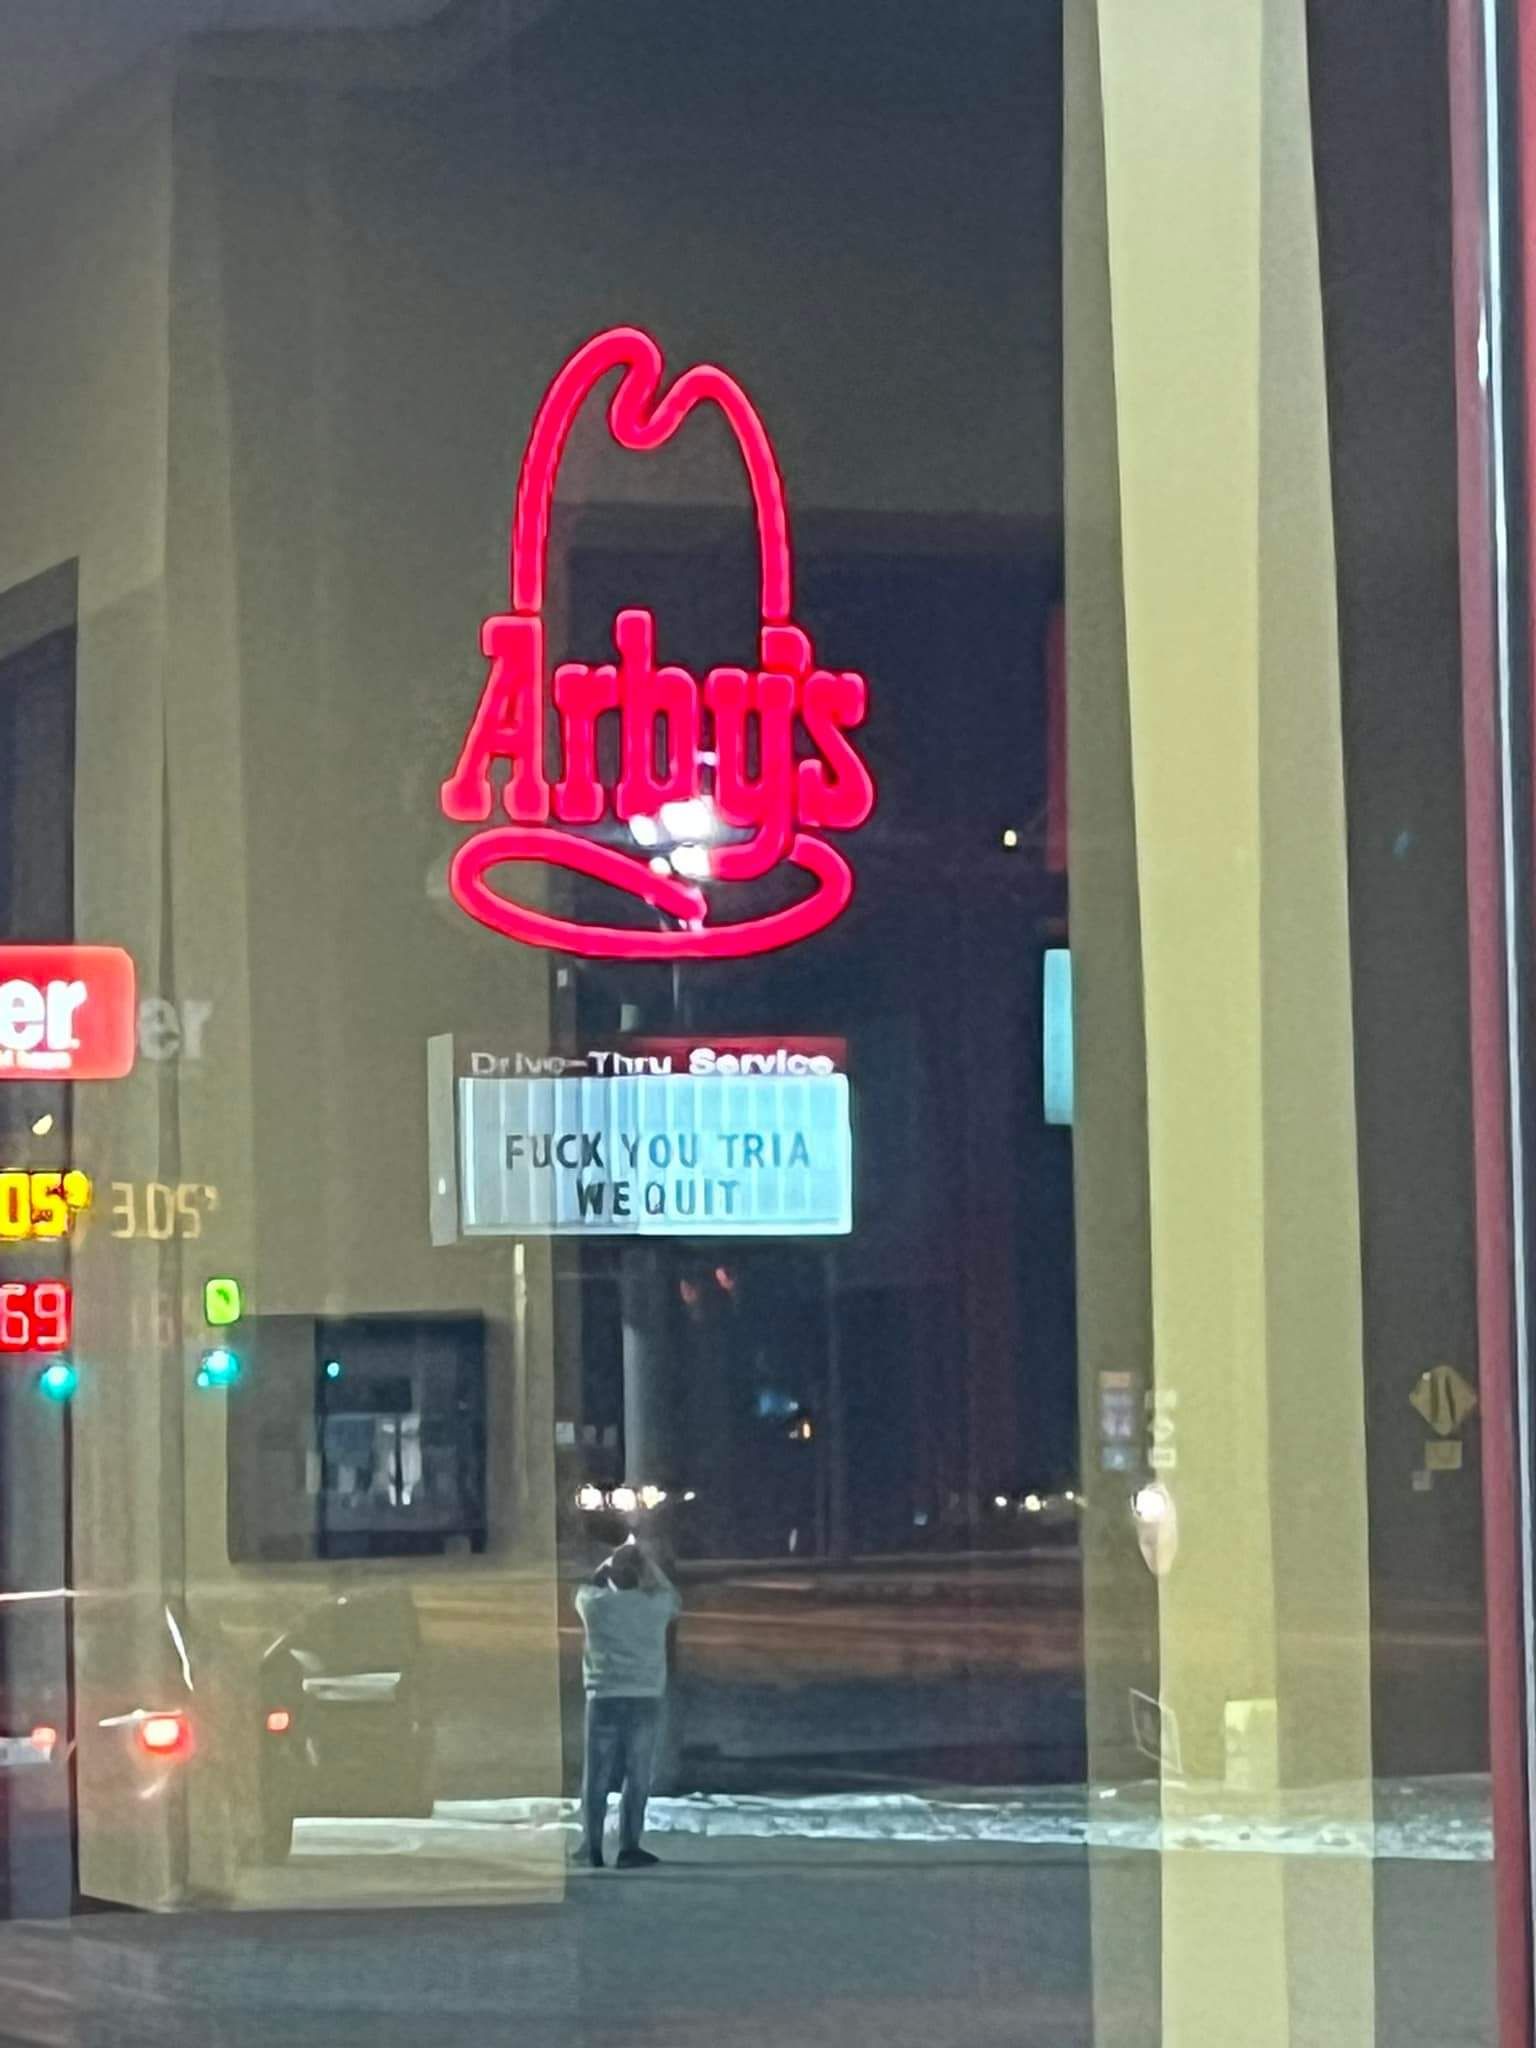 Welp no Arby's available today in Battle Creek Mi